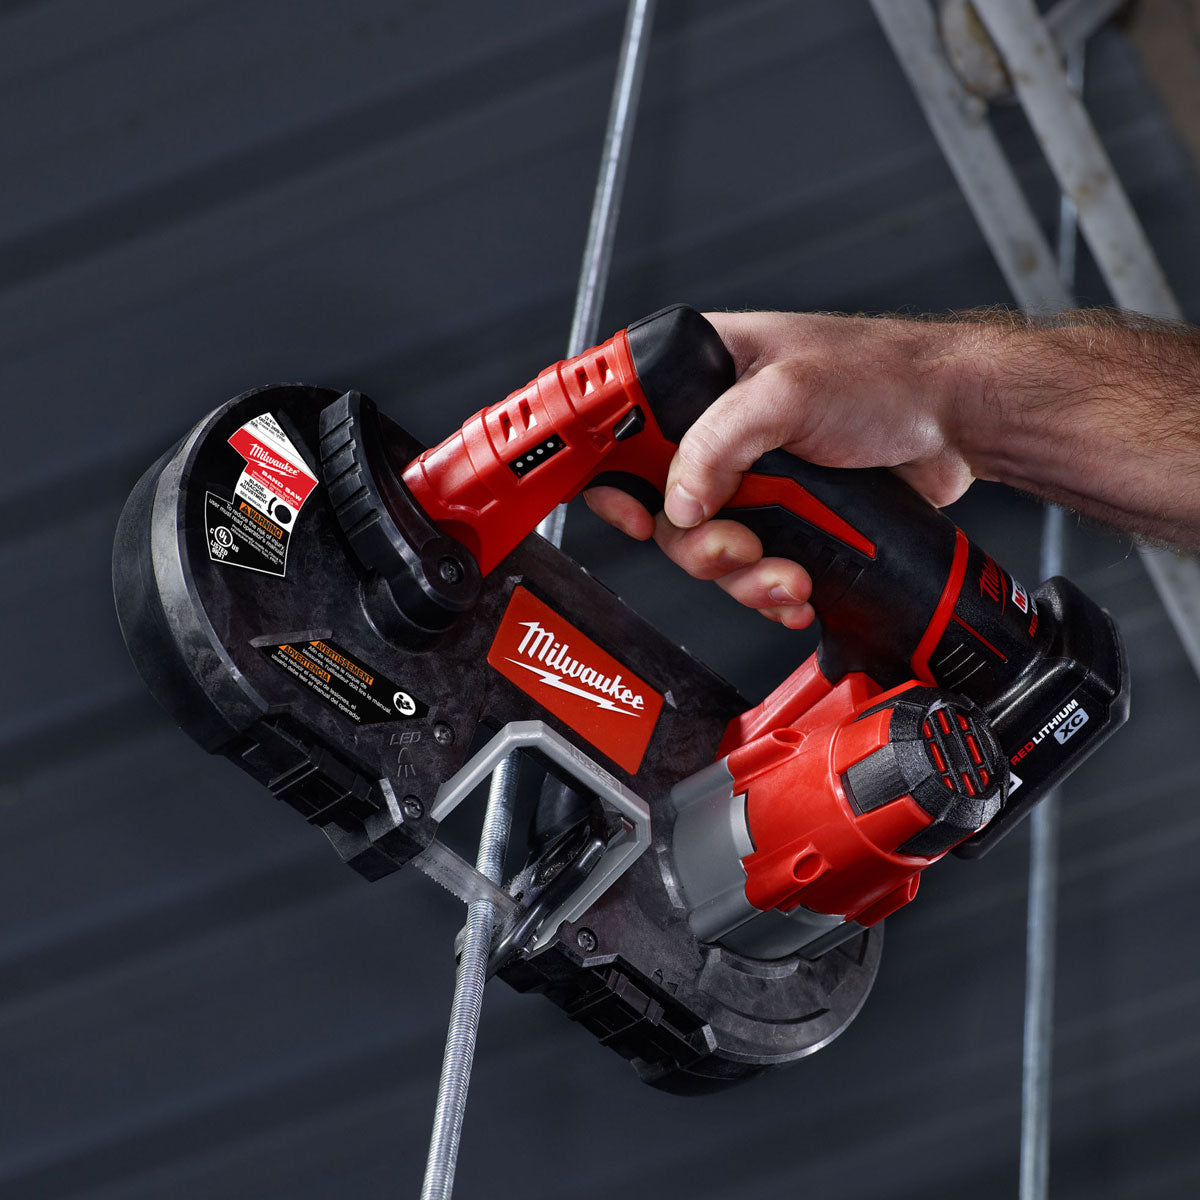 Milwaukee M12BS-0 12V Sub Compact Bandsaw with 2 x 4.0Ah Batteries & Charger in Bag